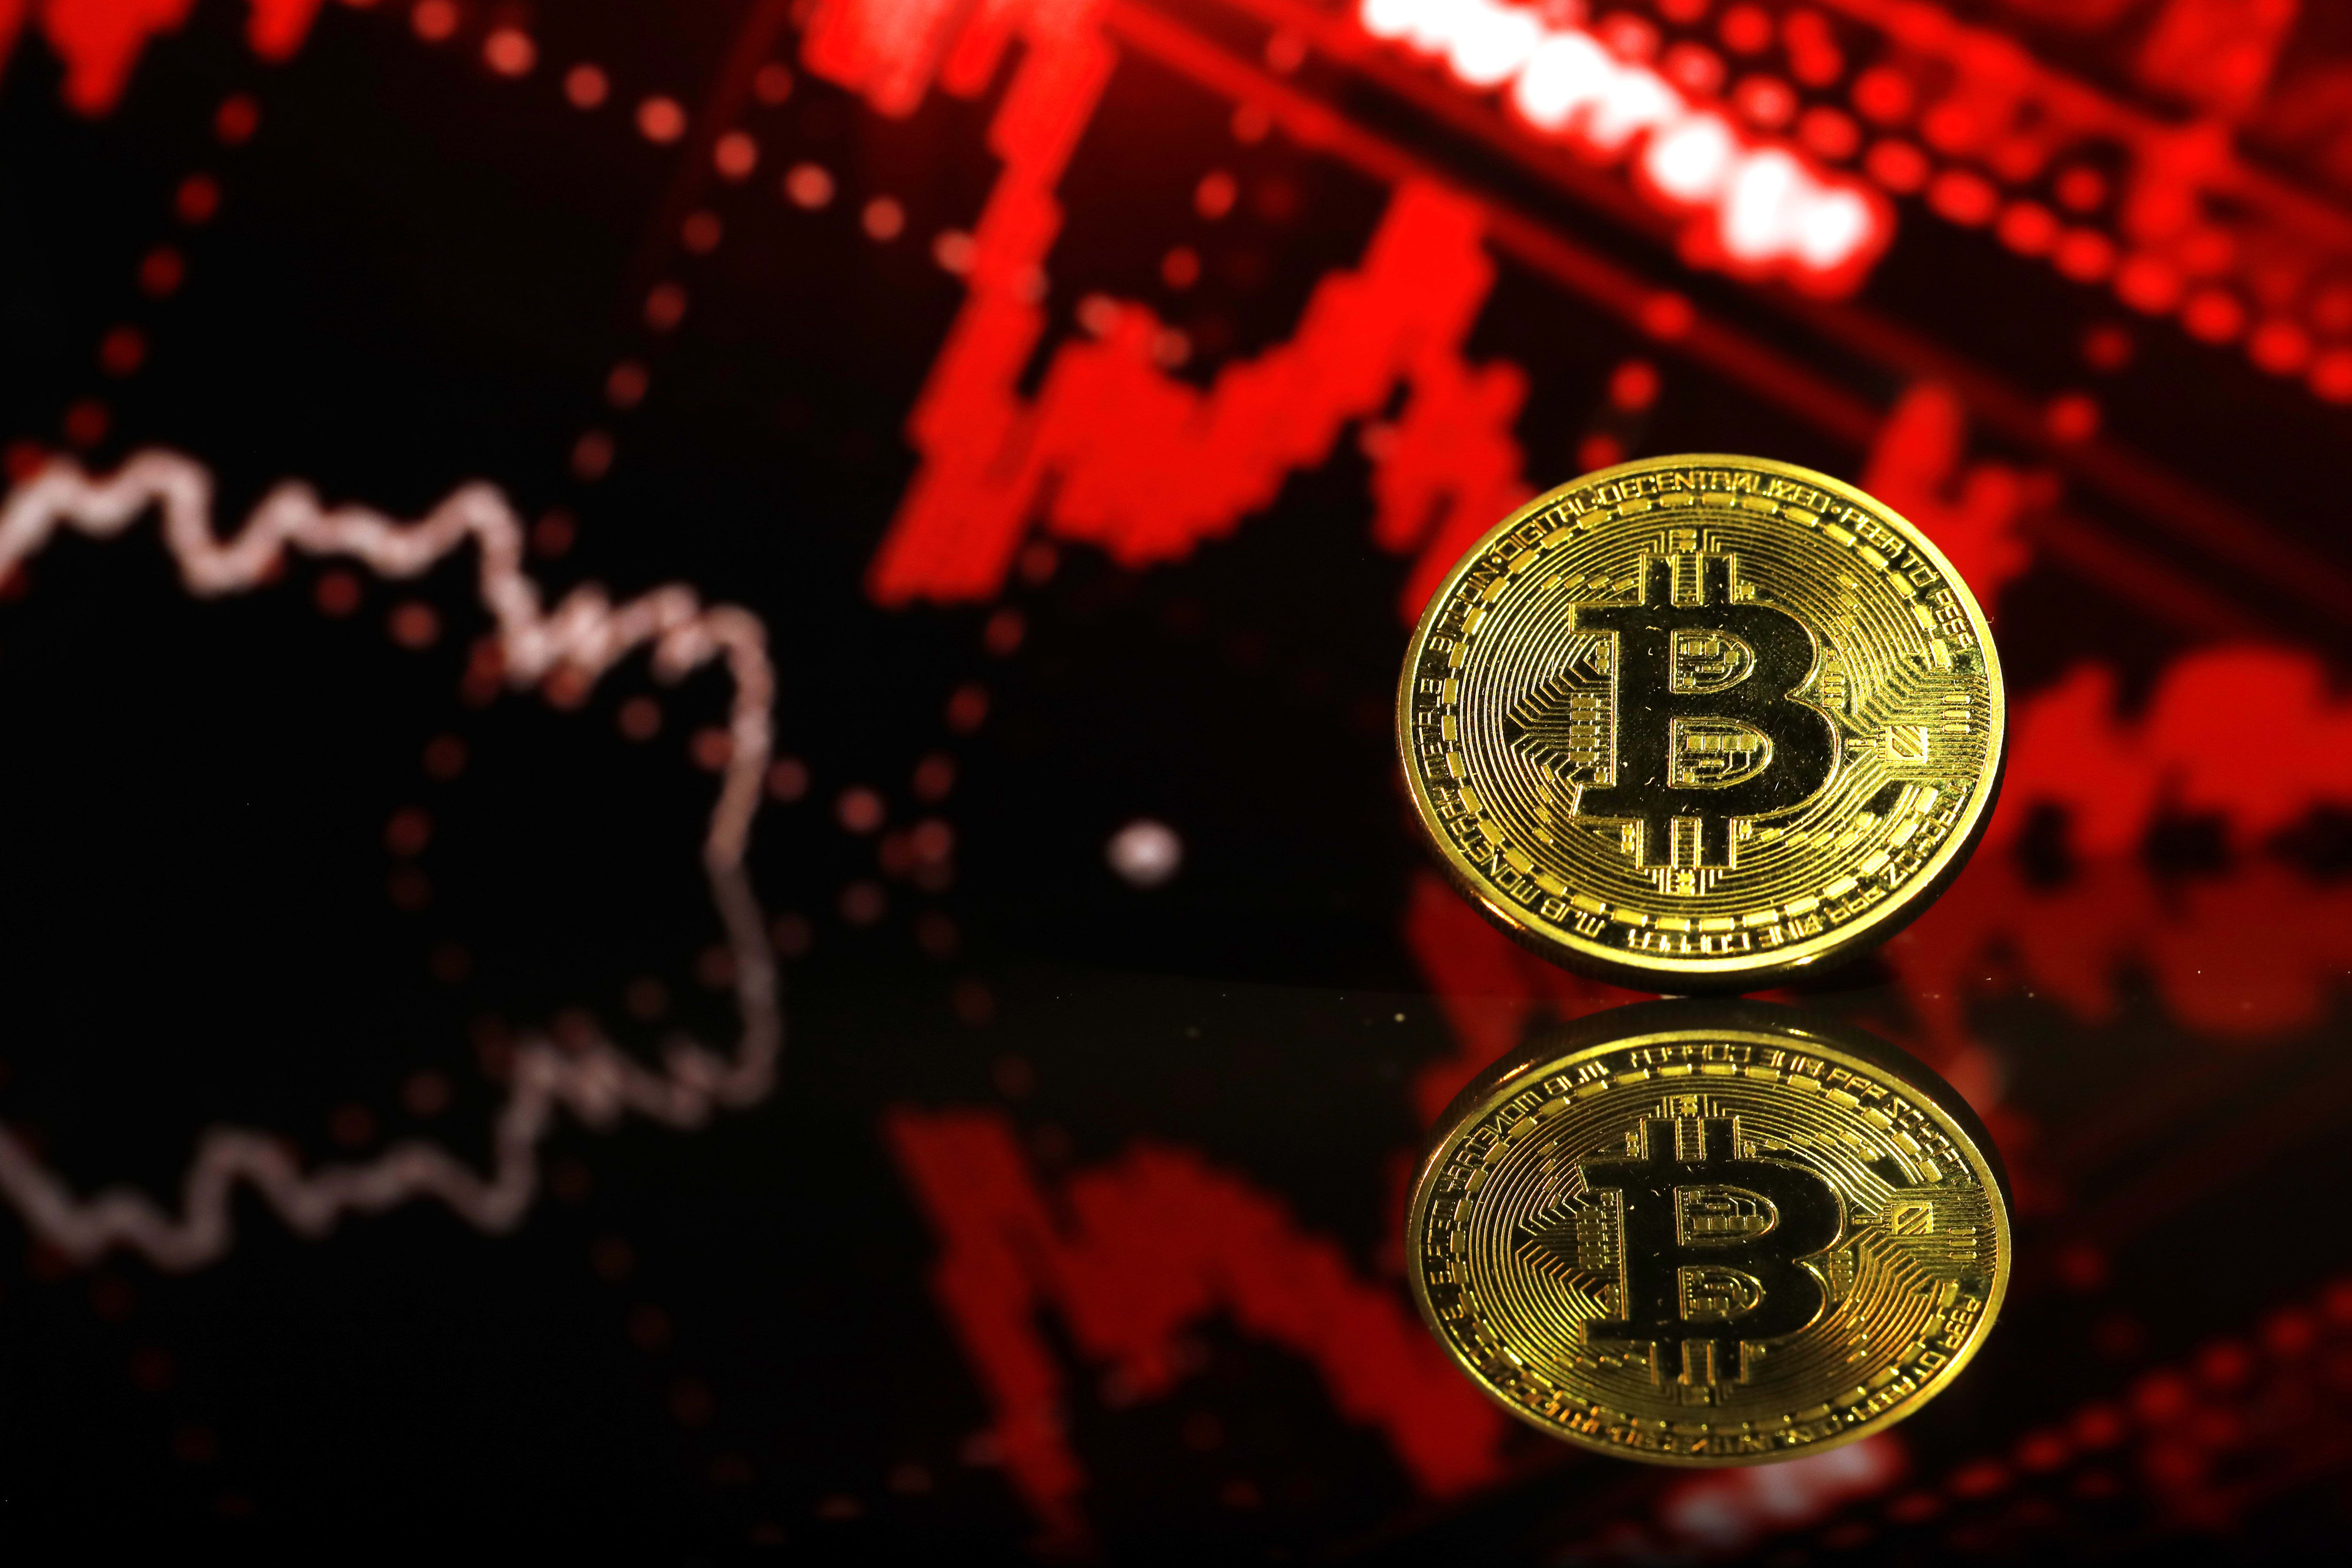 Cryptocurrencies see $93.5 billion wiped off value in 24 hours as bitcoin plunges 48%